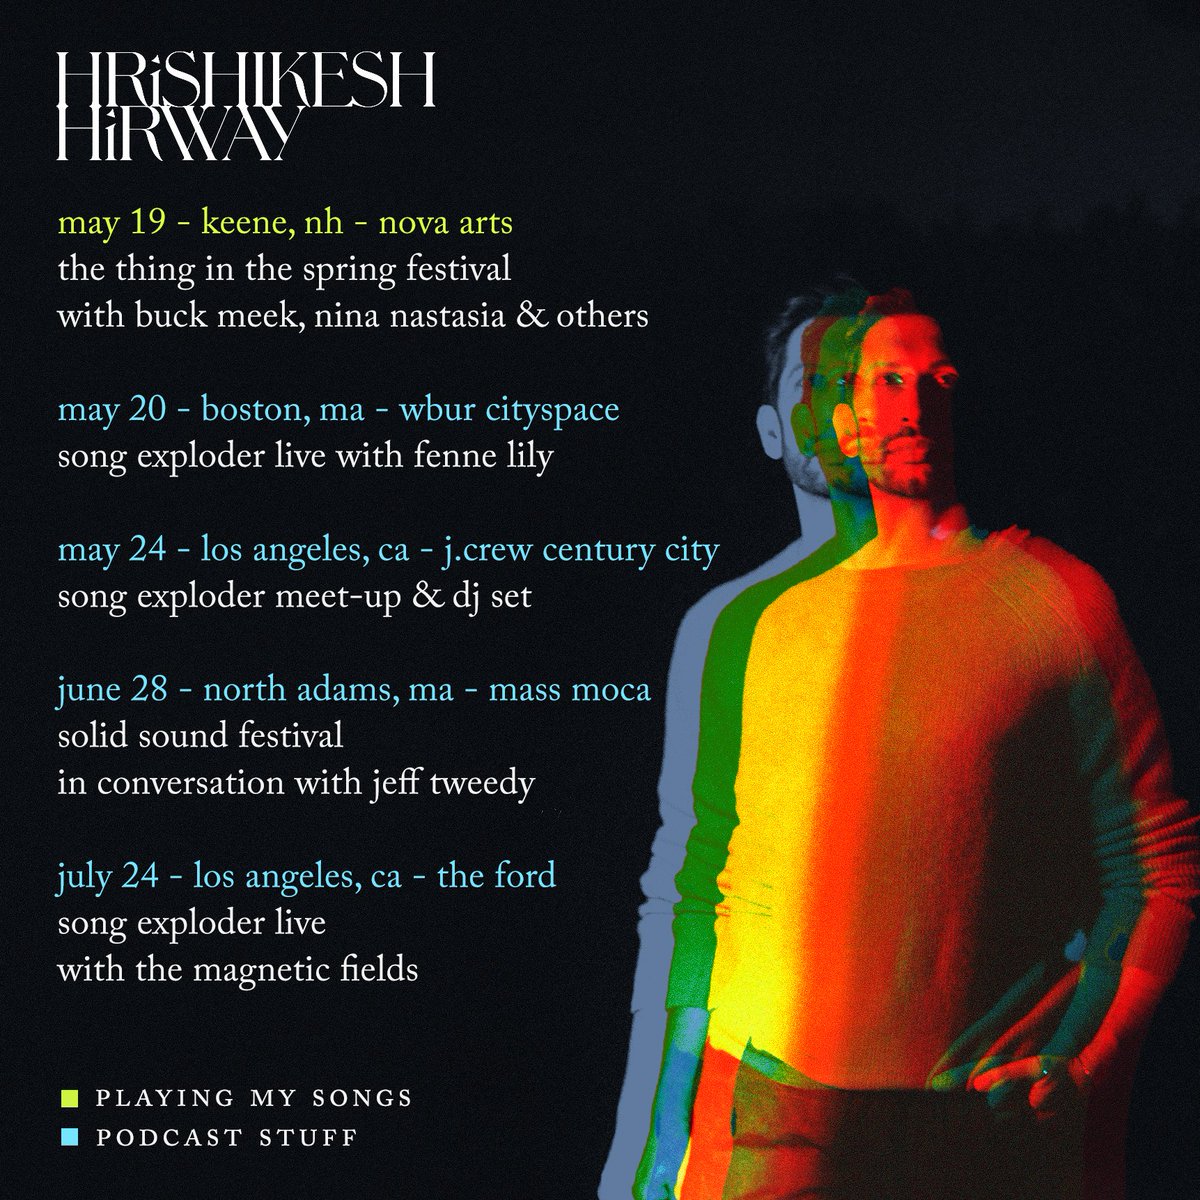 I've got some shows and @songexploder live events in the coming weeks (with guests @JeffTweedy of @Wilco, @TheMagFields, and @FenneLily)! Tickets and more info at hrishikesh.co/live. Hope to see you!